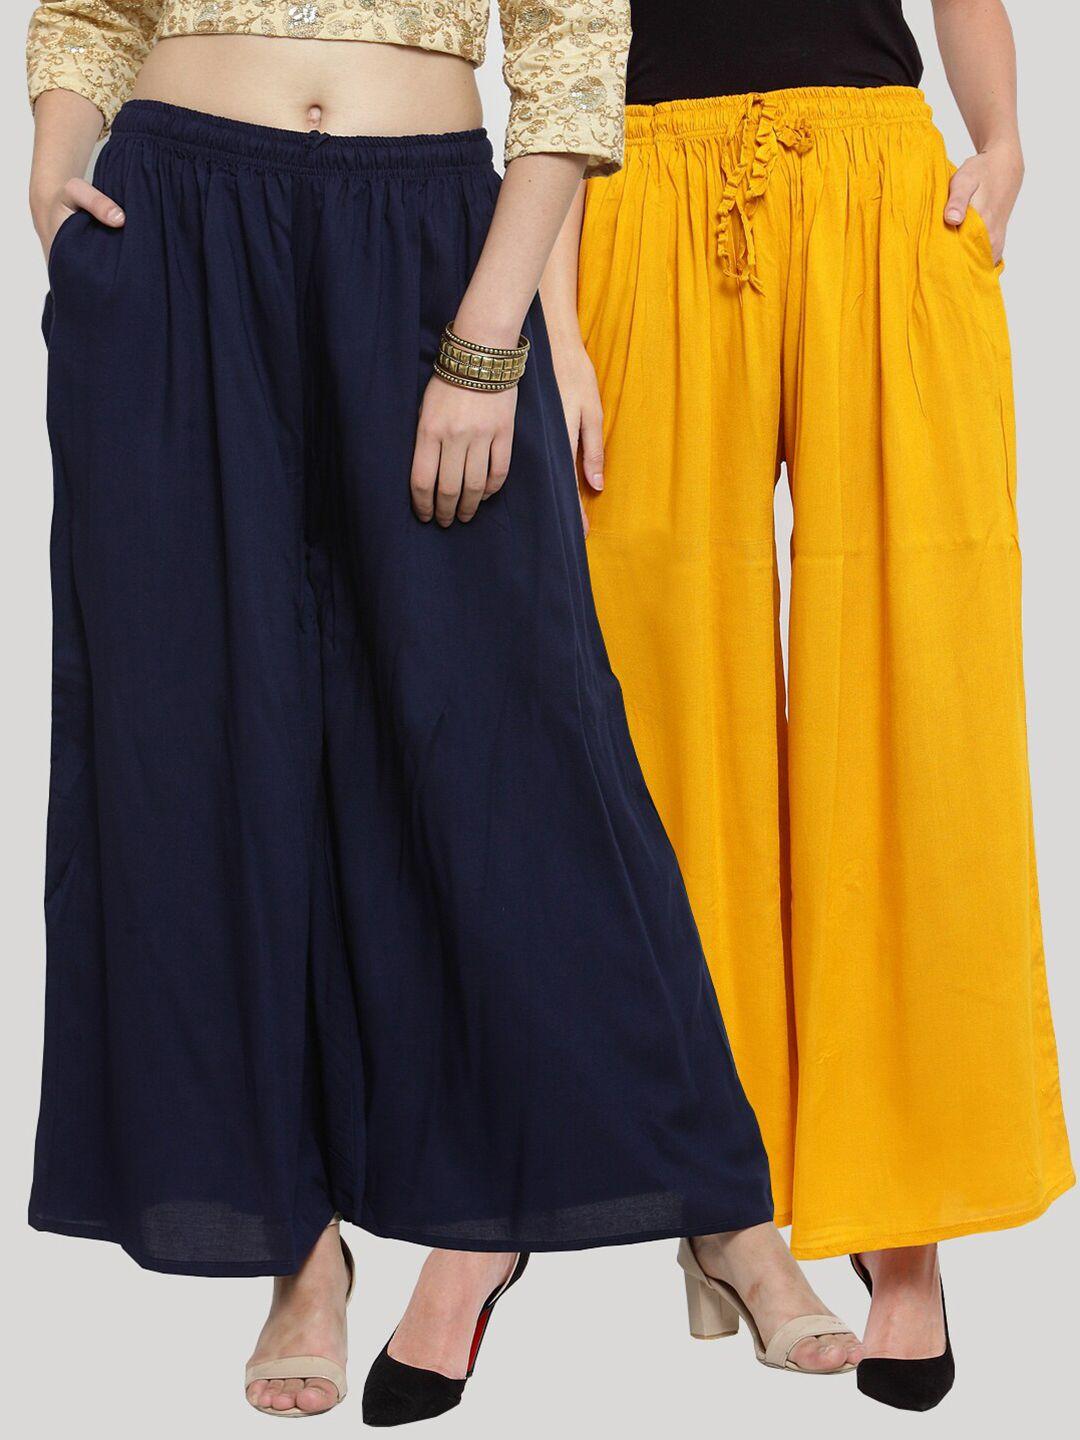 clora-creation-women-pack-of-2-yellow-&-navy-blue-knitted-ethnic-palazzos